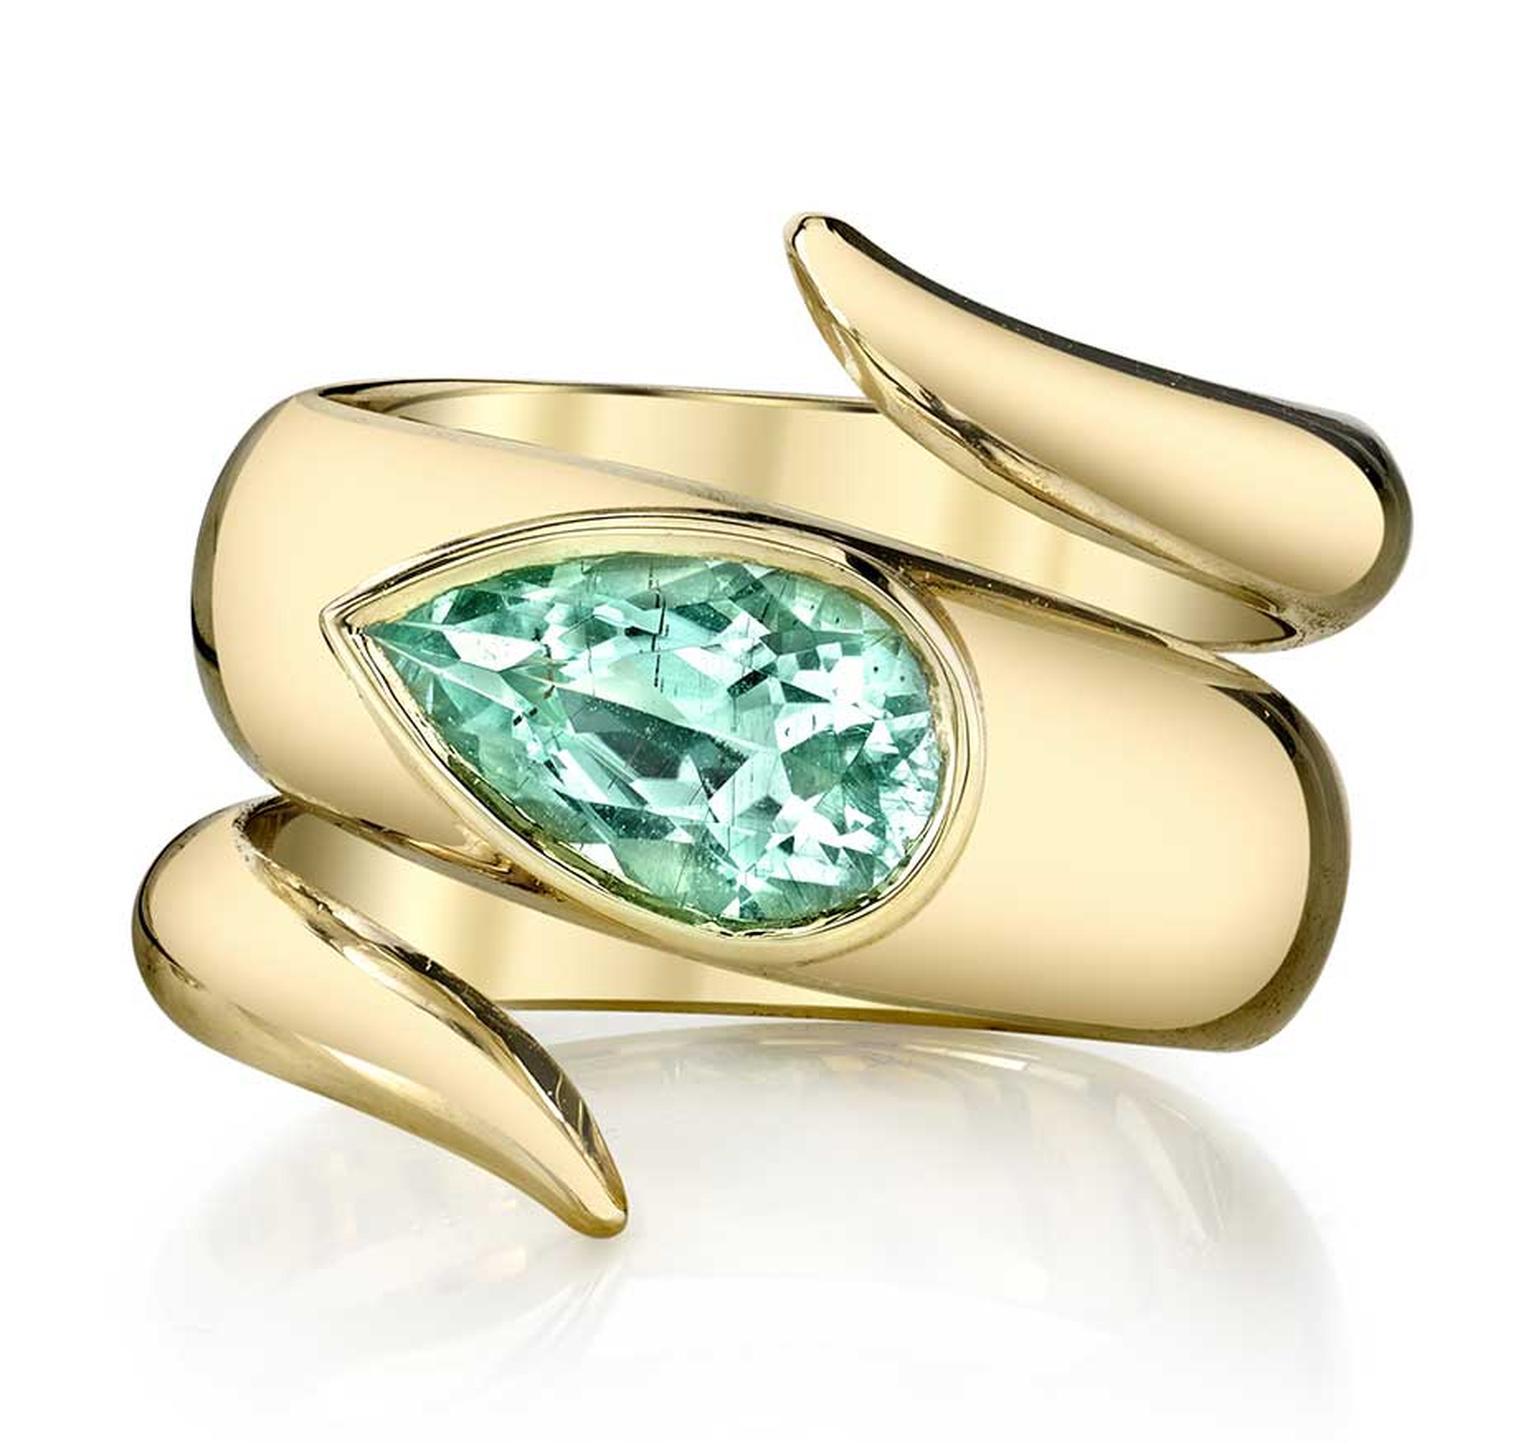 Erica Courtney green tourmaline wrap ring in gold